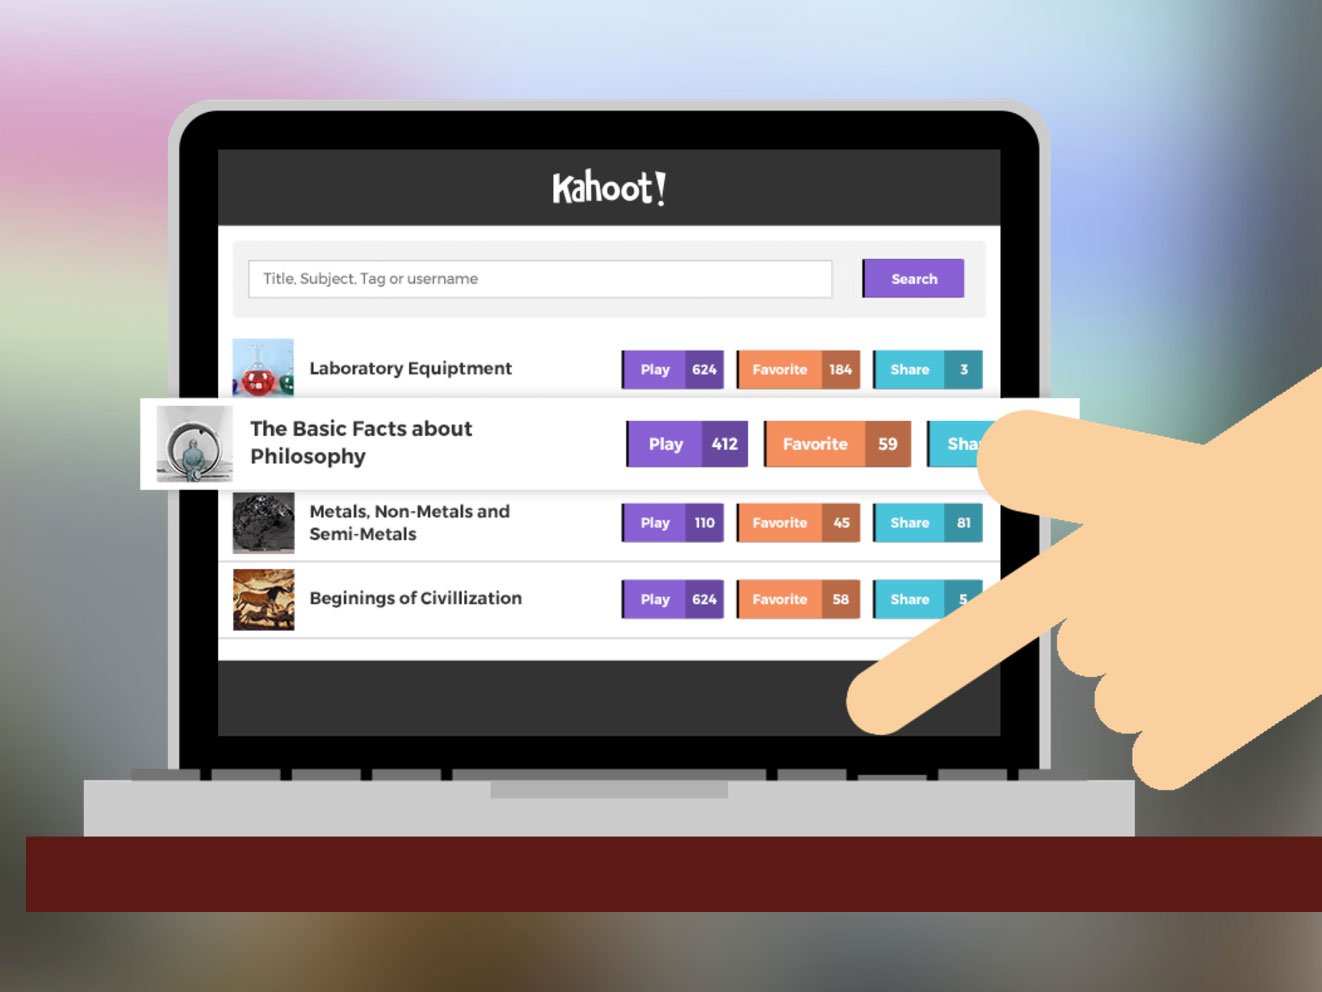 Education quiz app Kahoot says it’s now used in 50% of all US classrooms, 70M users overall